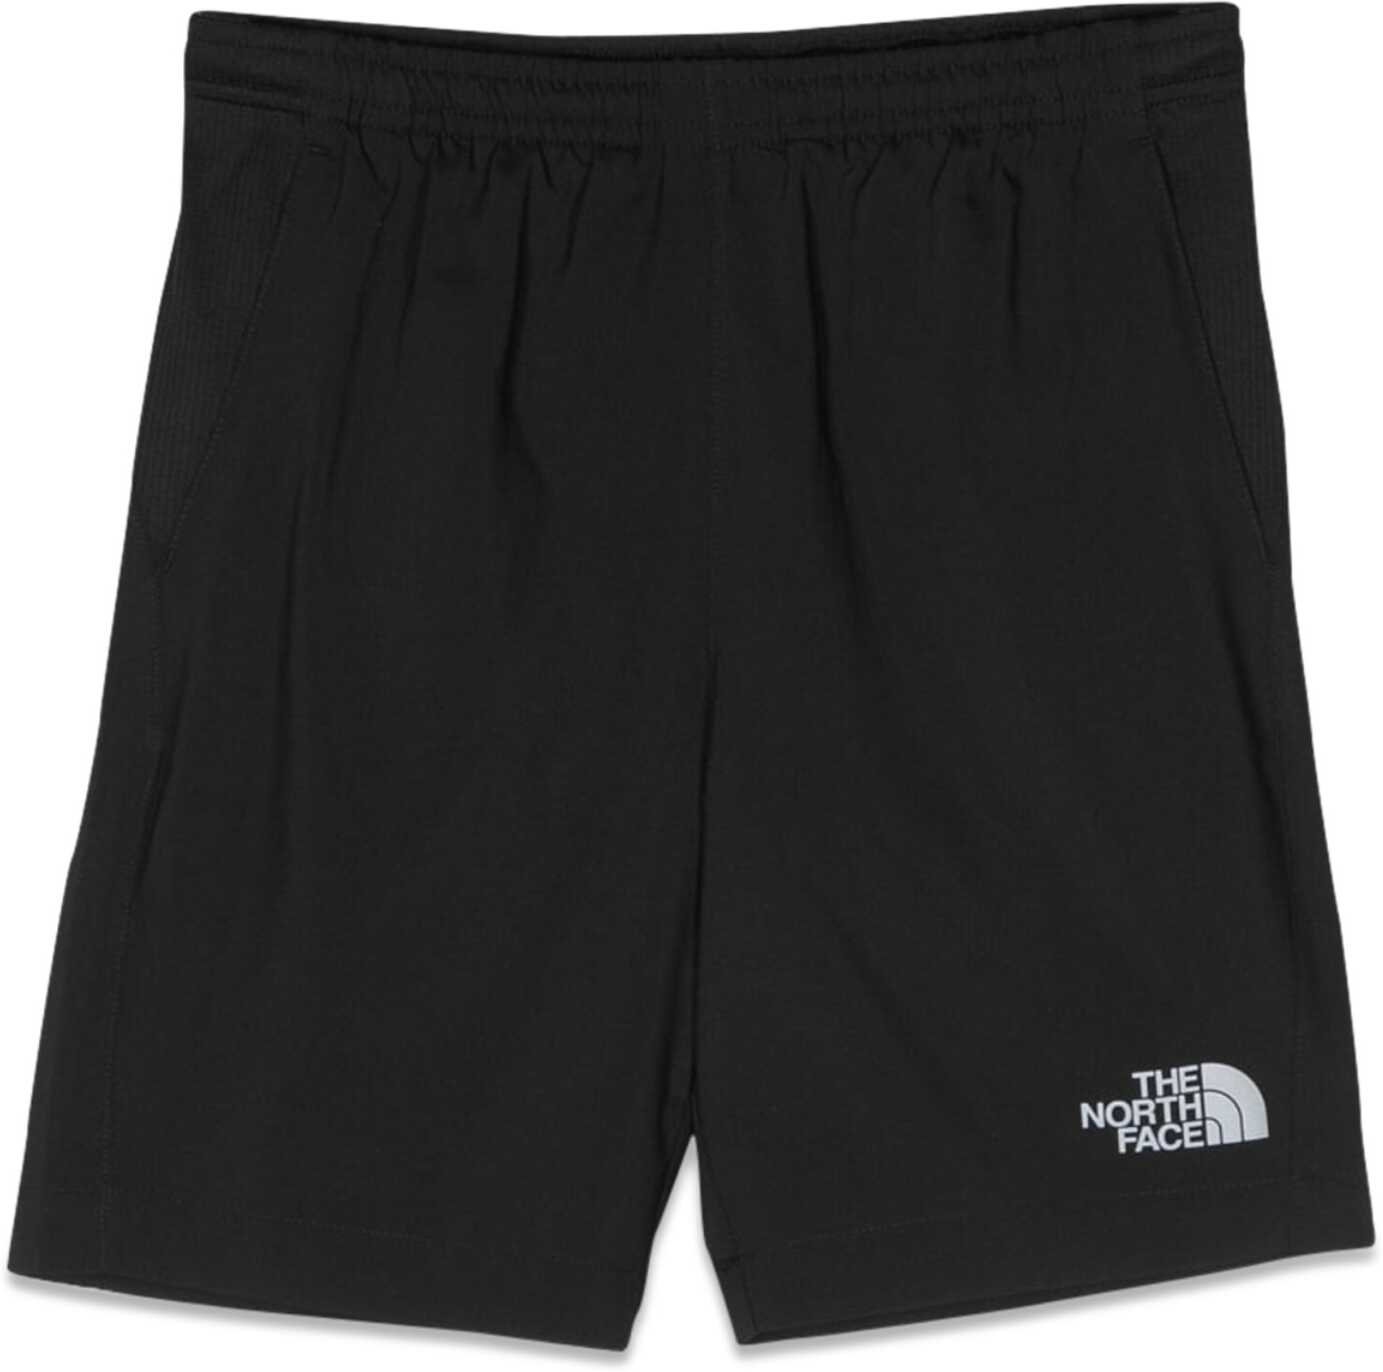 The North Face Never Stop Shorts BLACK